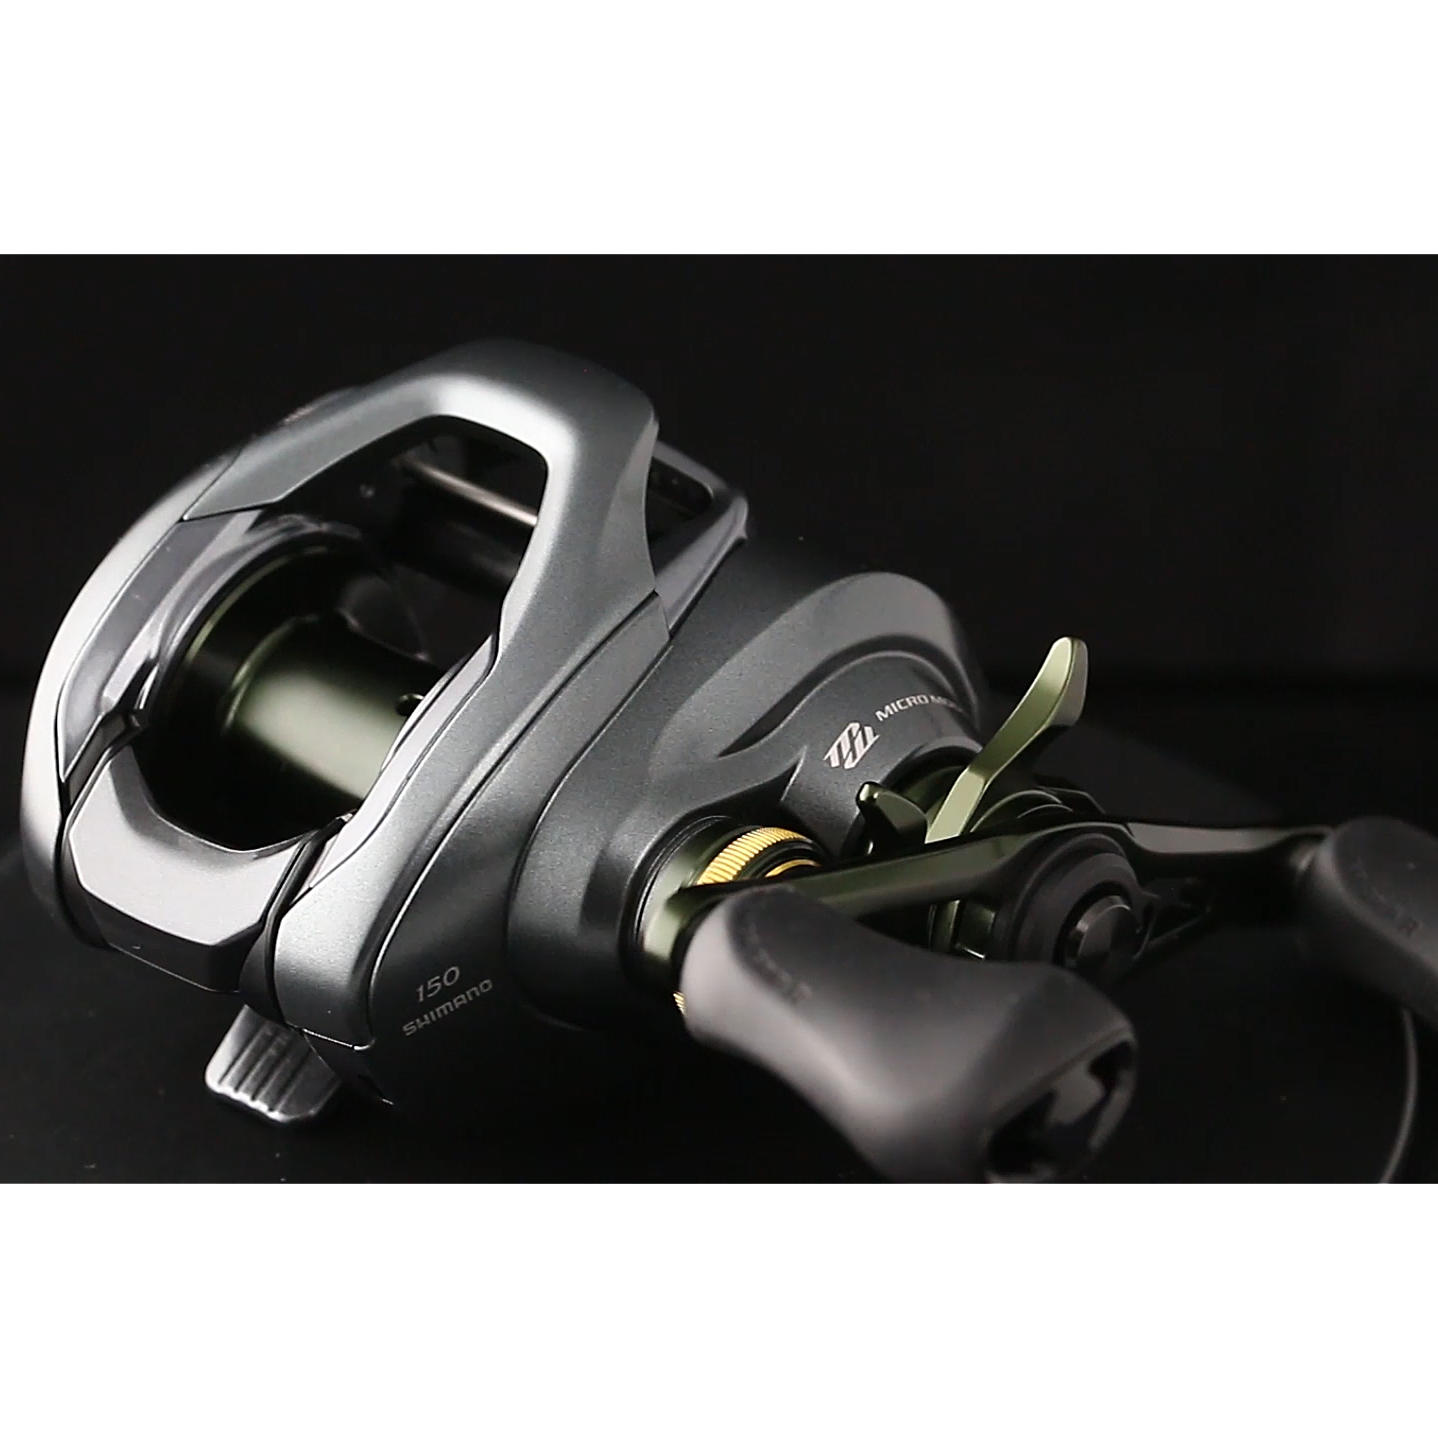 Reminder: The New Shimano Curado DC Available For Pre-Order